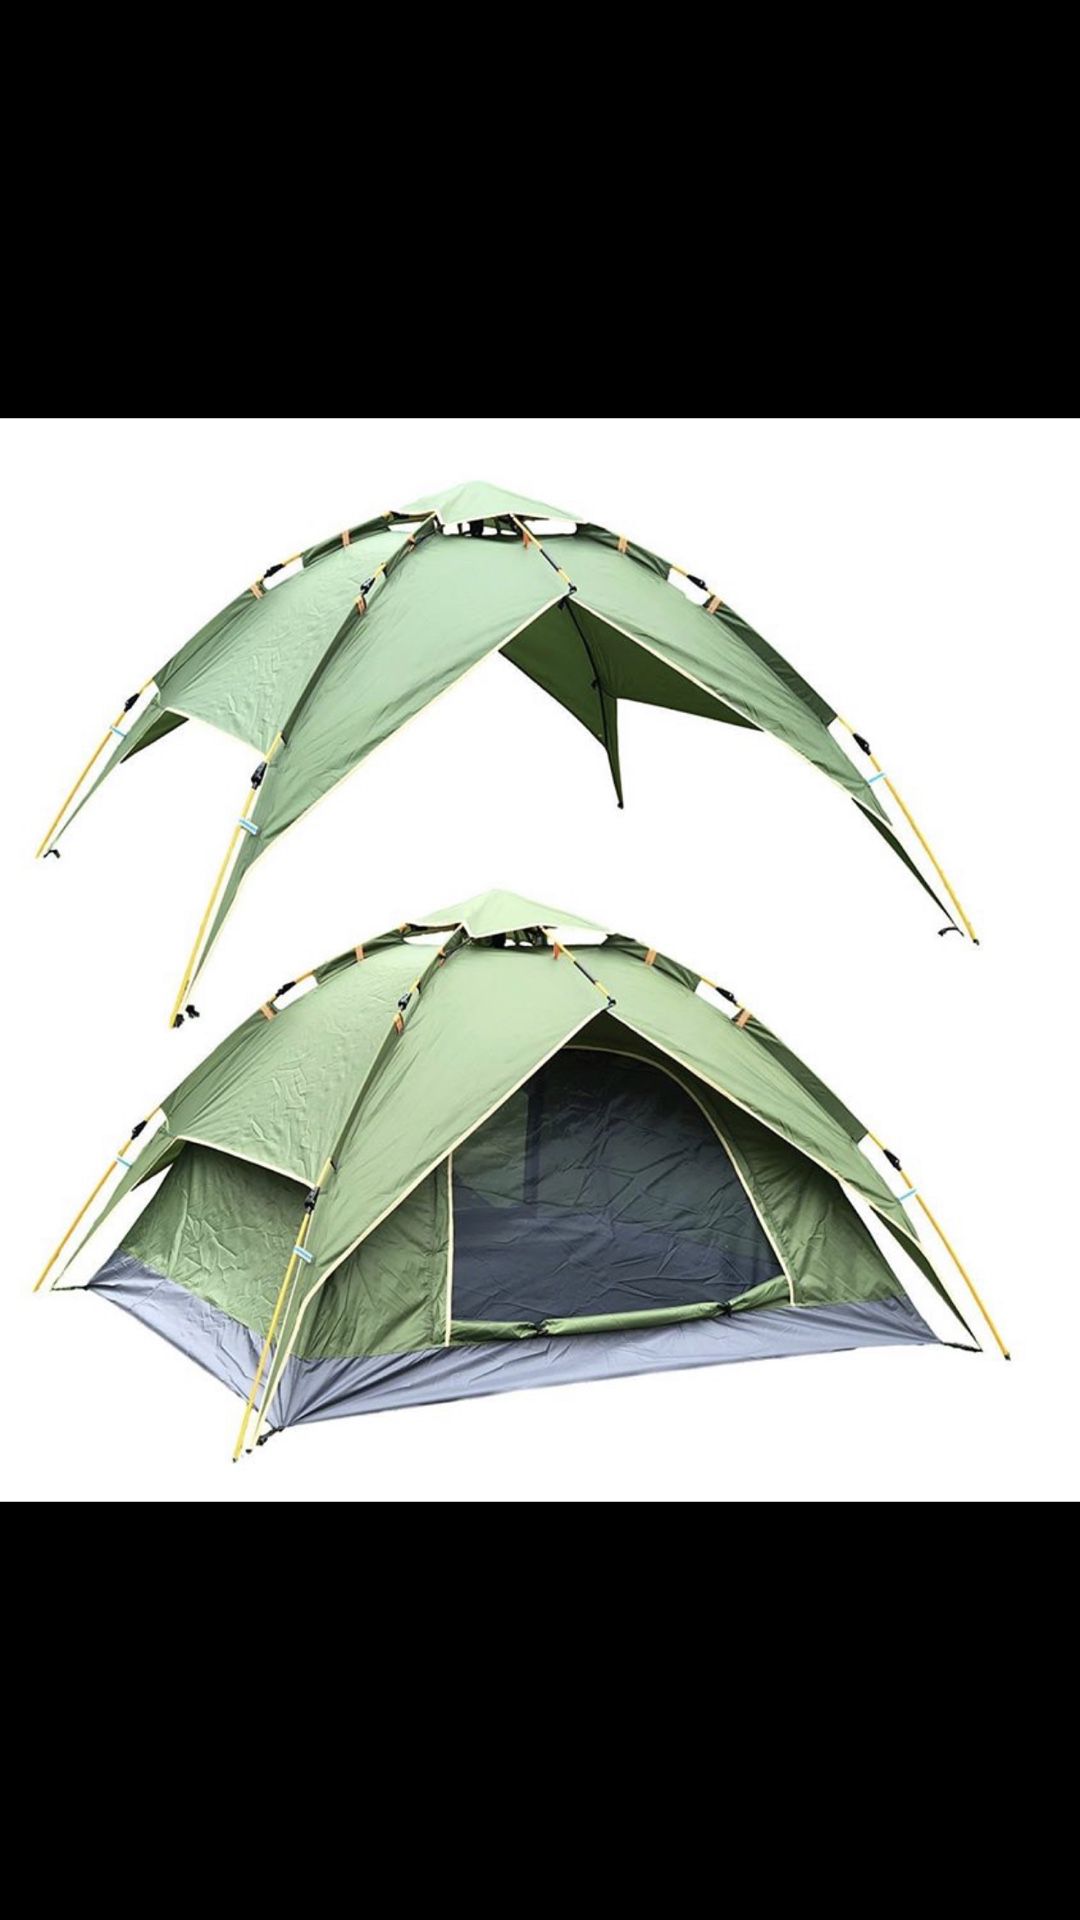 Camping Tent, For 3-4 ppl, Brand New